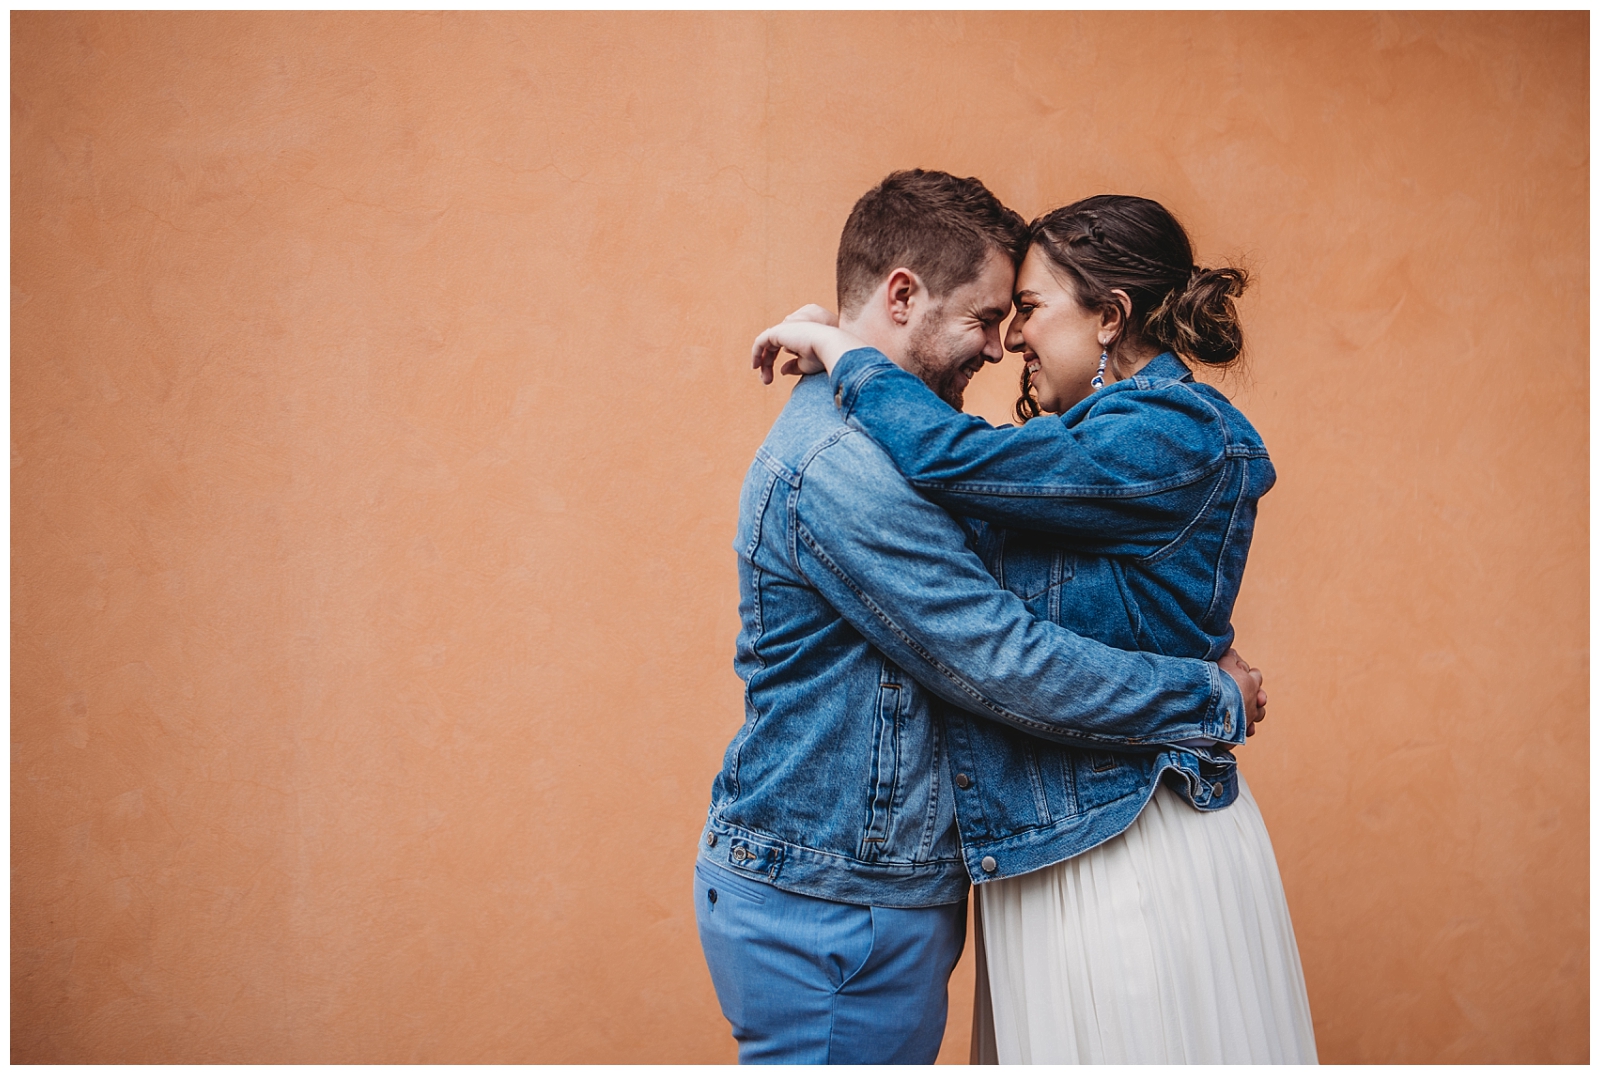 Bride and Groom wearing denim jackets stand in front of orange wall giggling with foreheads together.